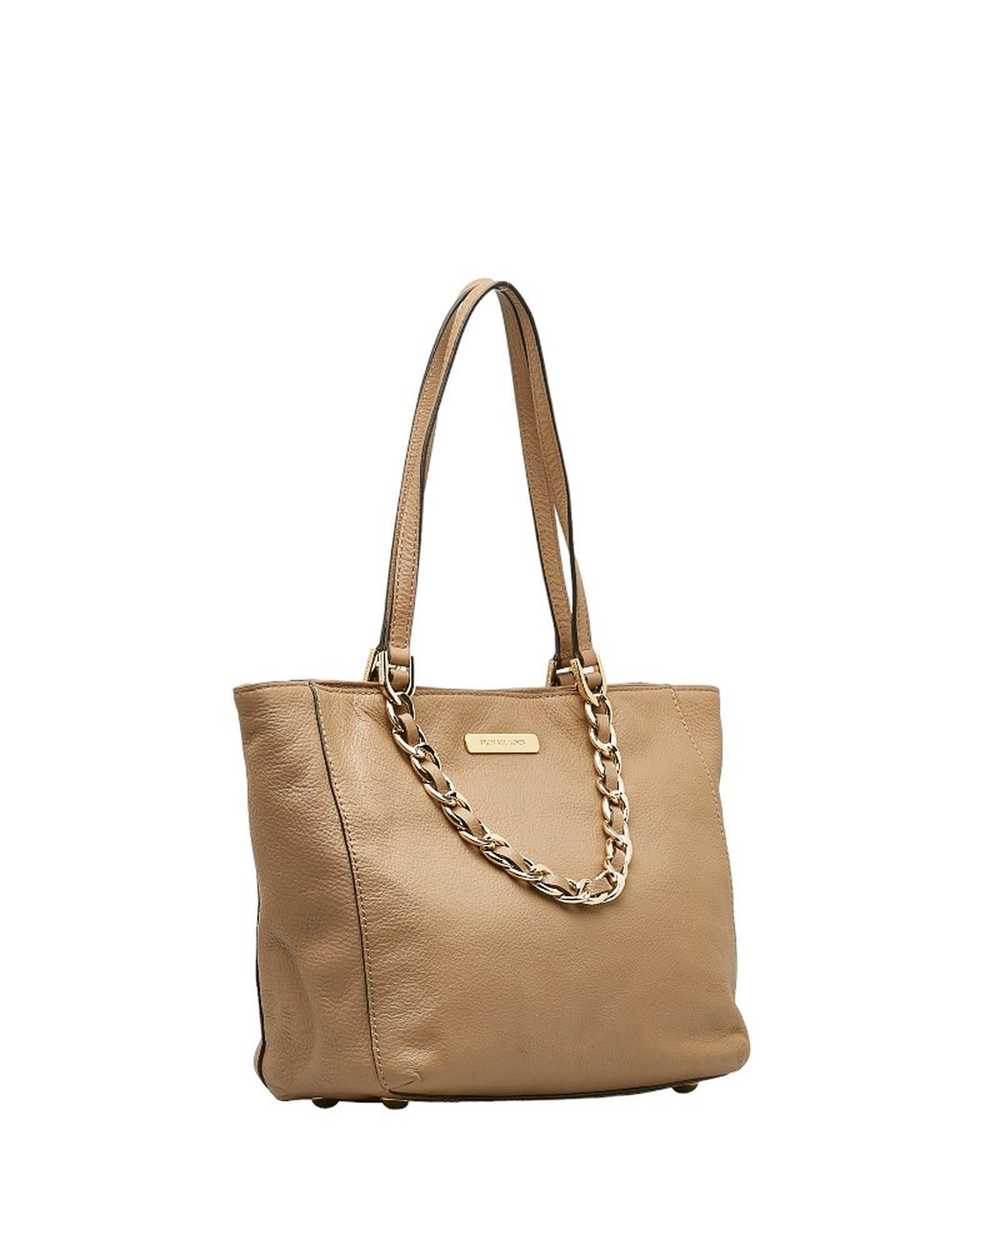 Michael Kors Leather Chained Tote Bag in Brown - image 2